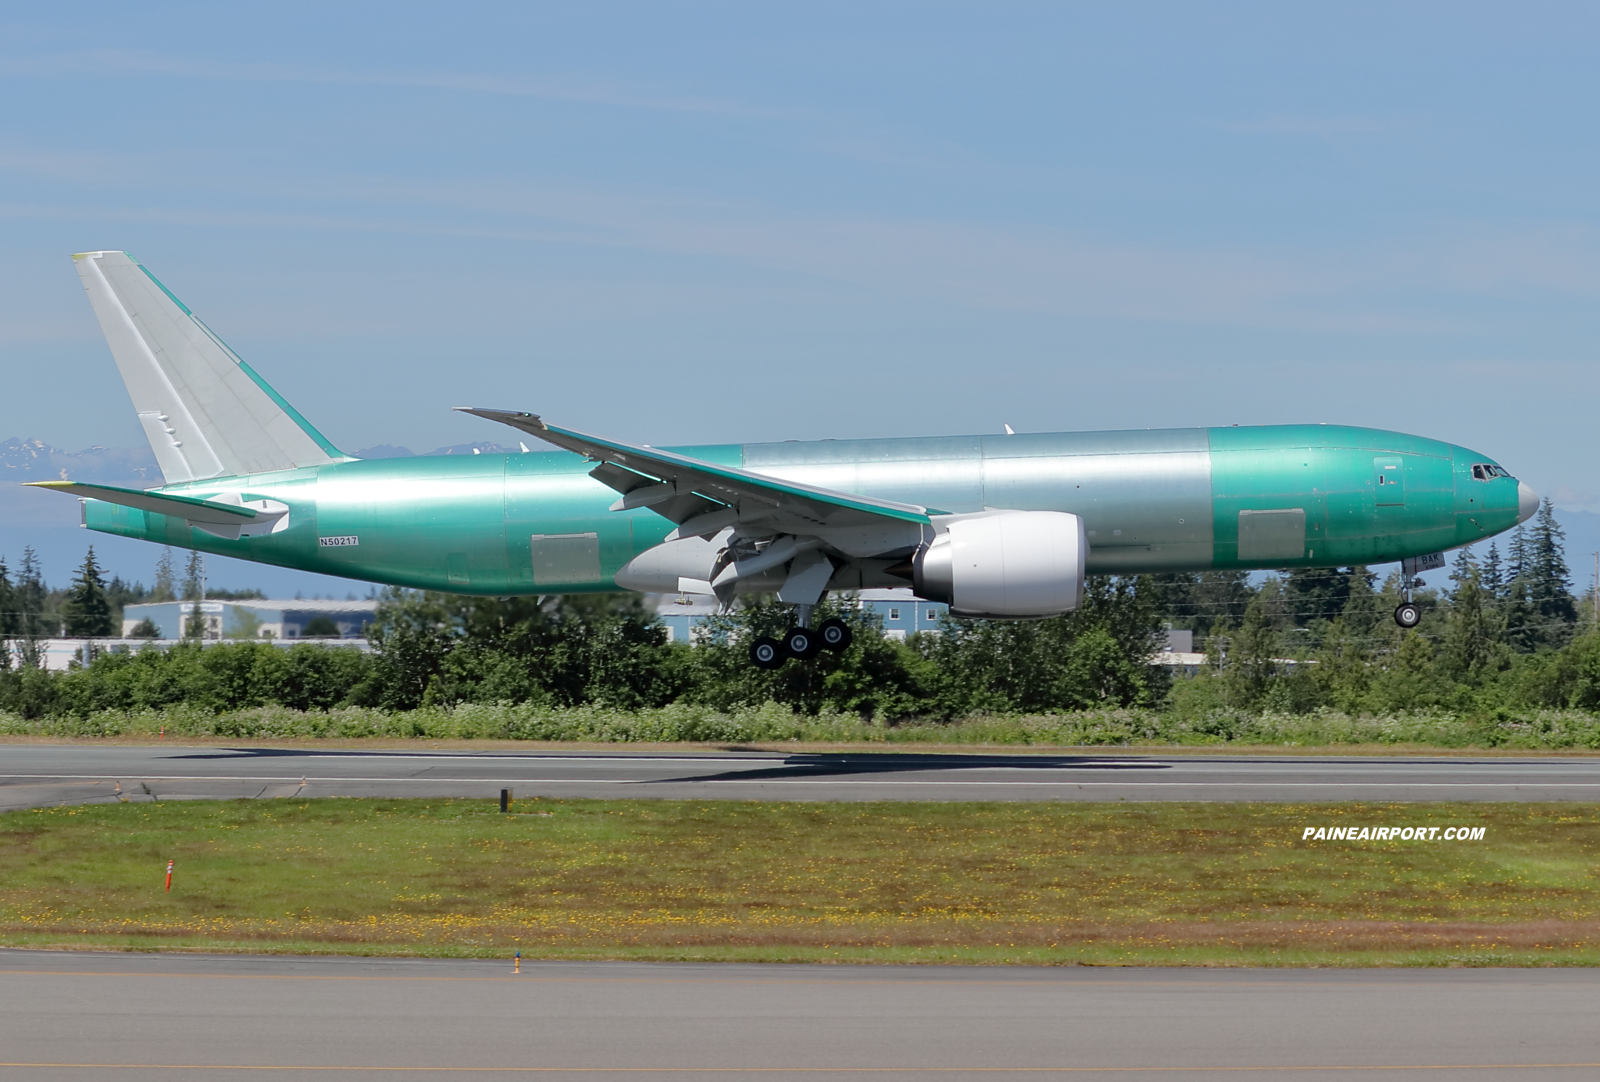 777F N50217 at KPAE Paine Field